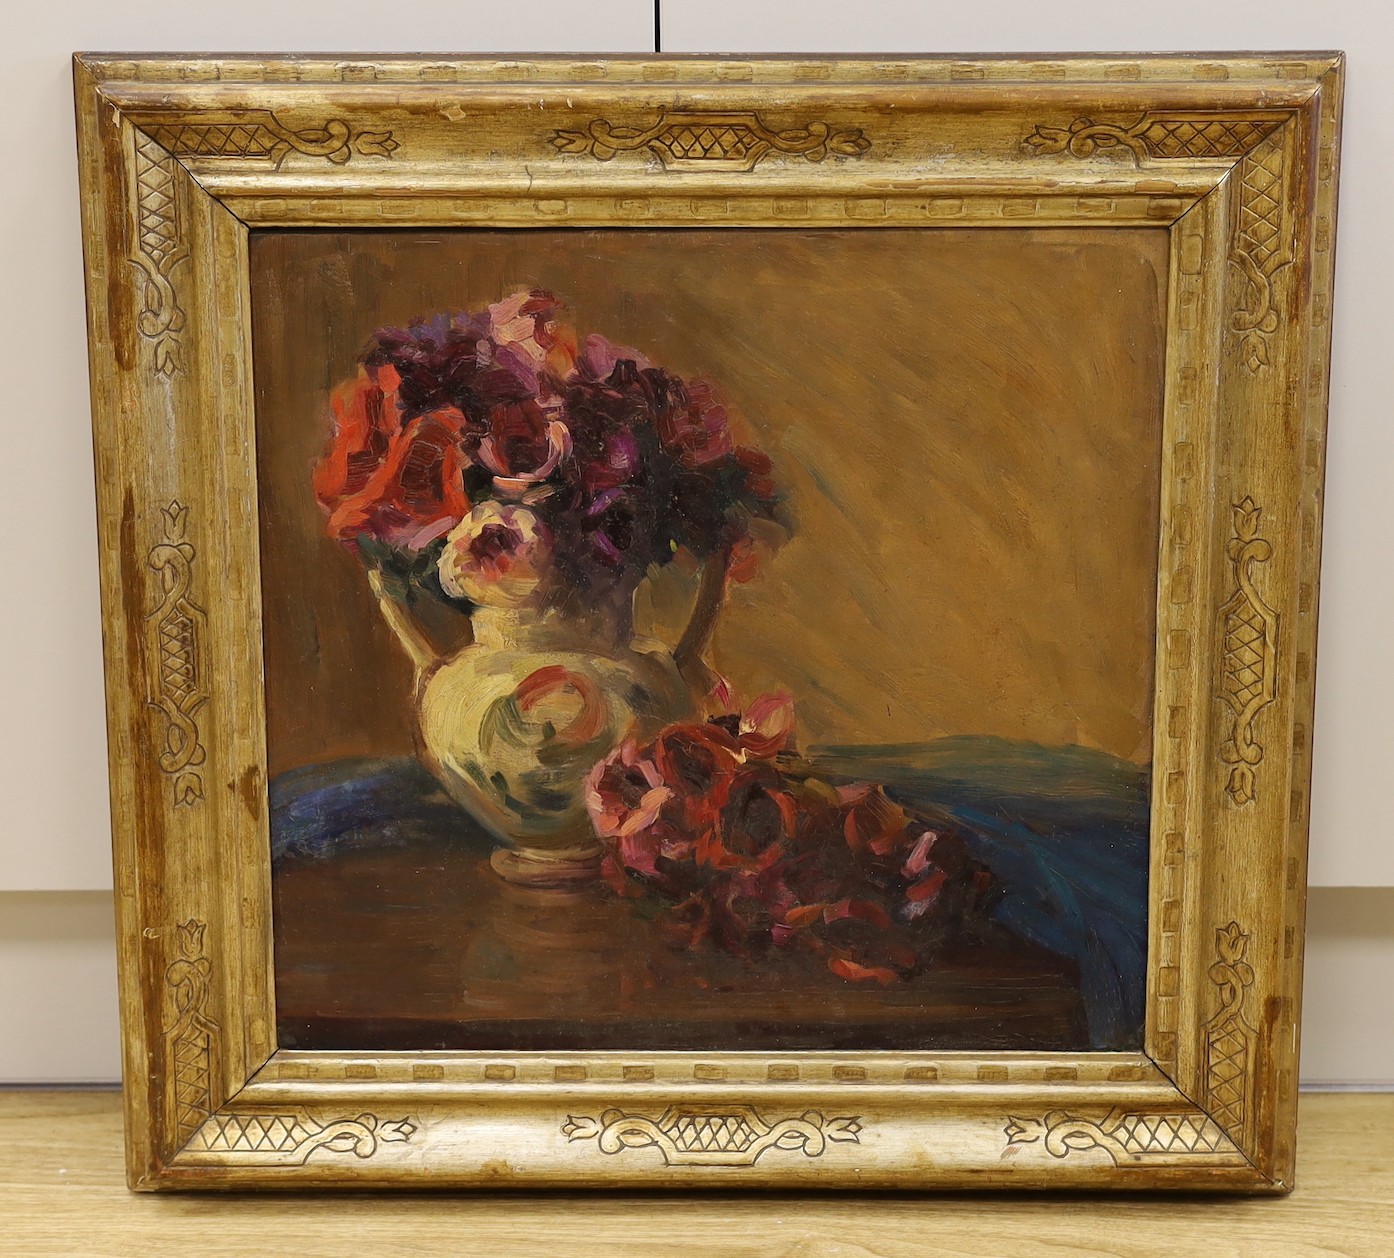 Early 20th century English School, oil on canvas, Still life of flowers in a jug, 45 x 48cm, Rowley Gallery frame